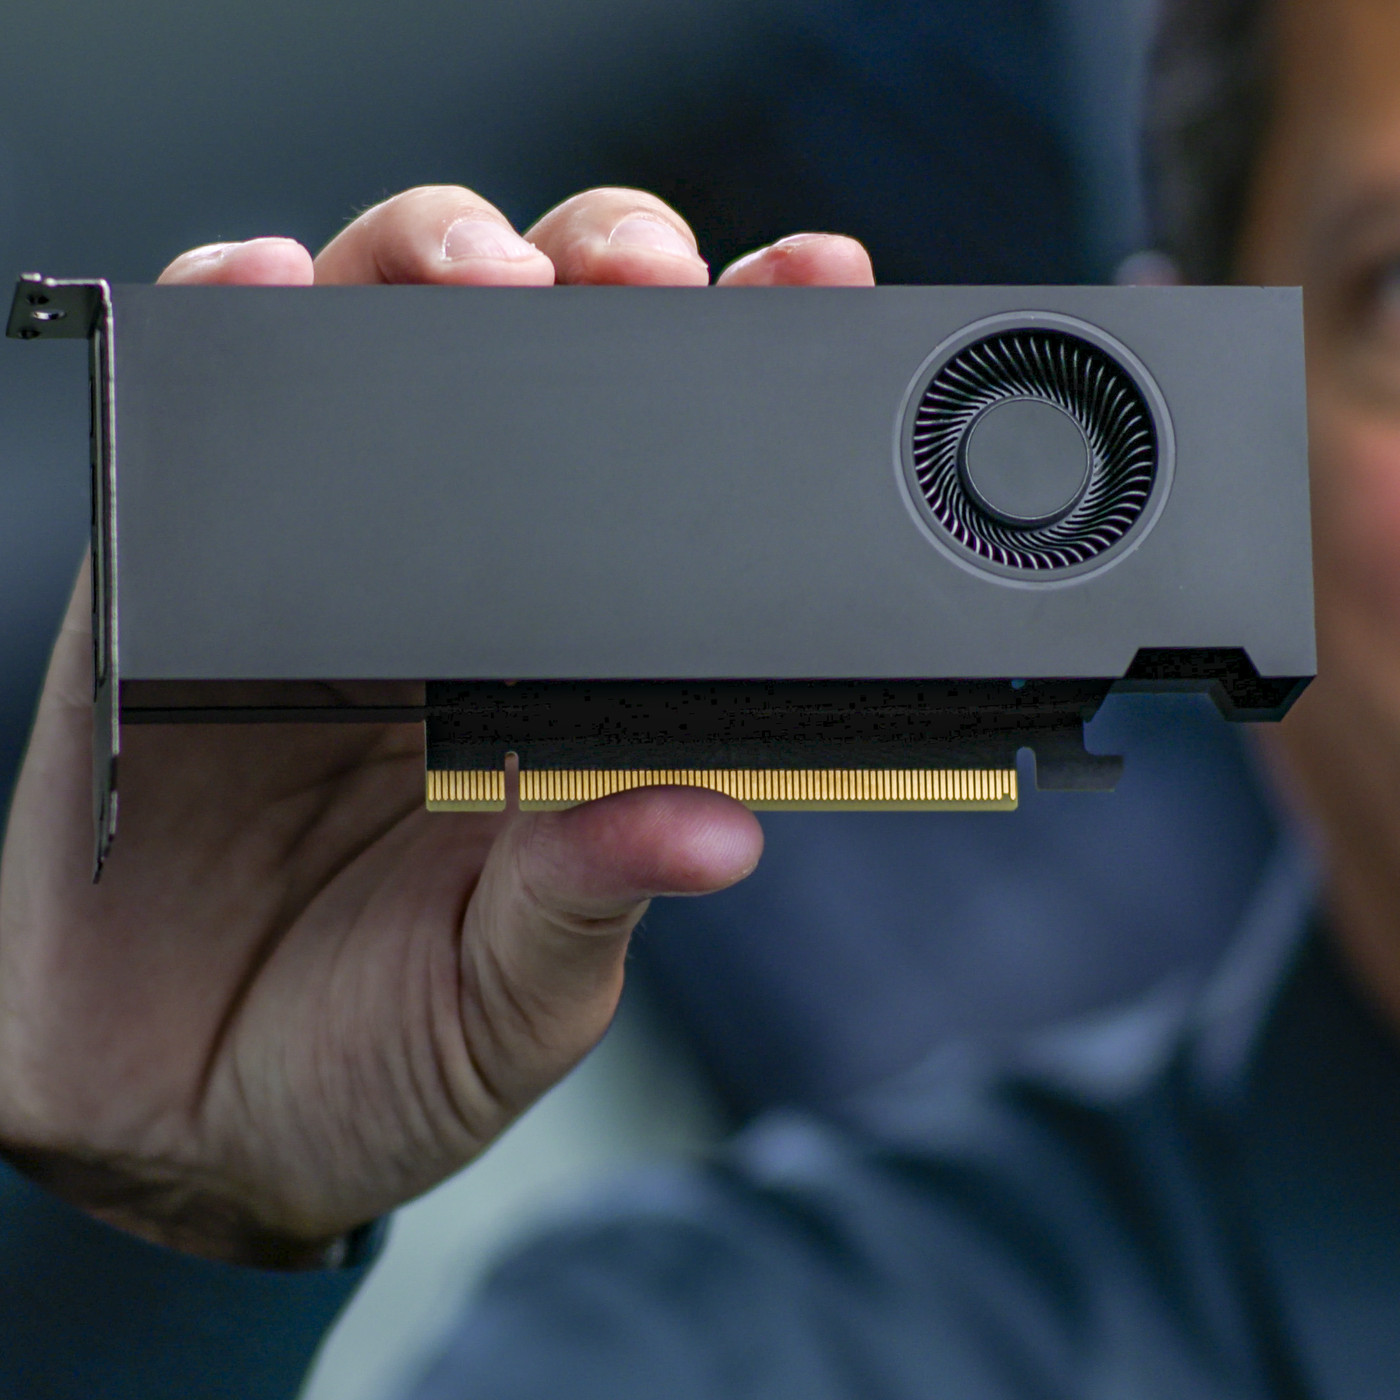 Nvidia's tiny RTX A2000 GPU can fit inside a small form factor PC 